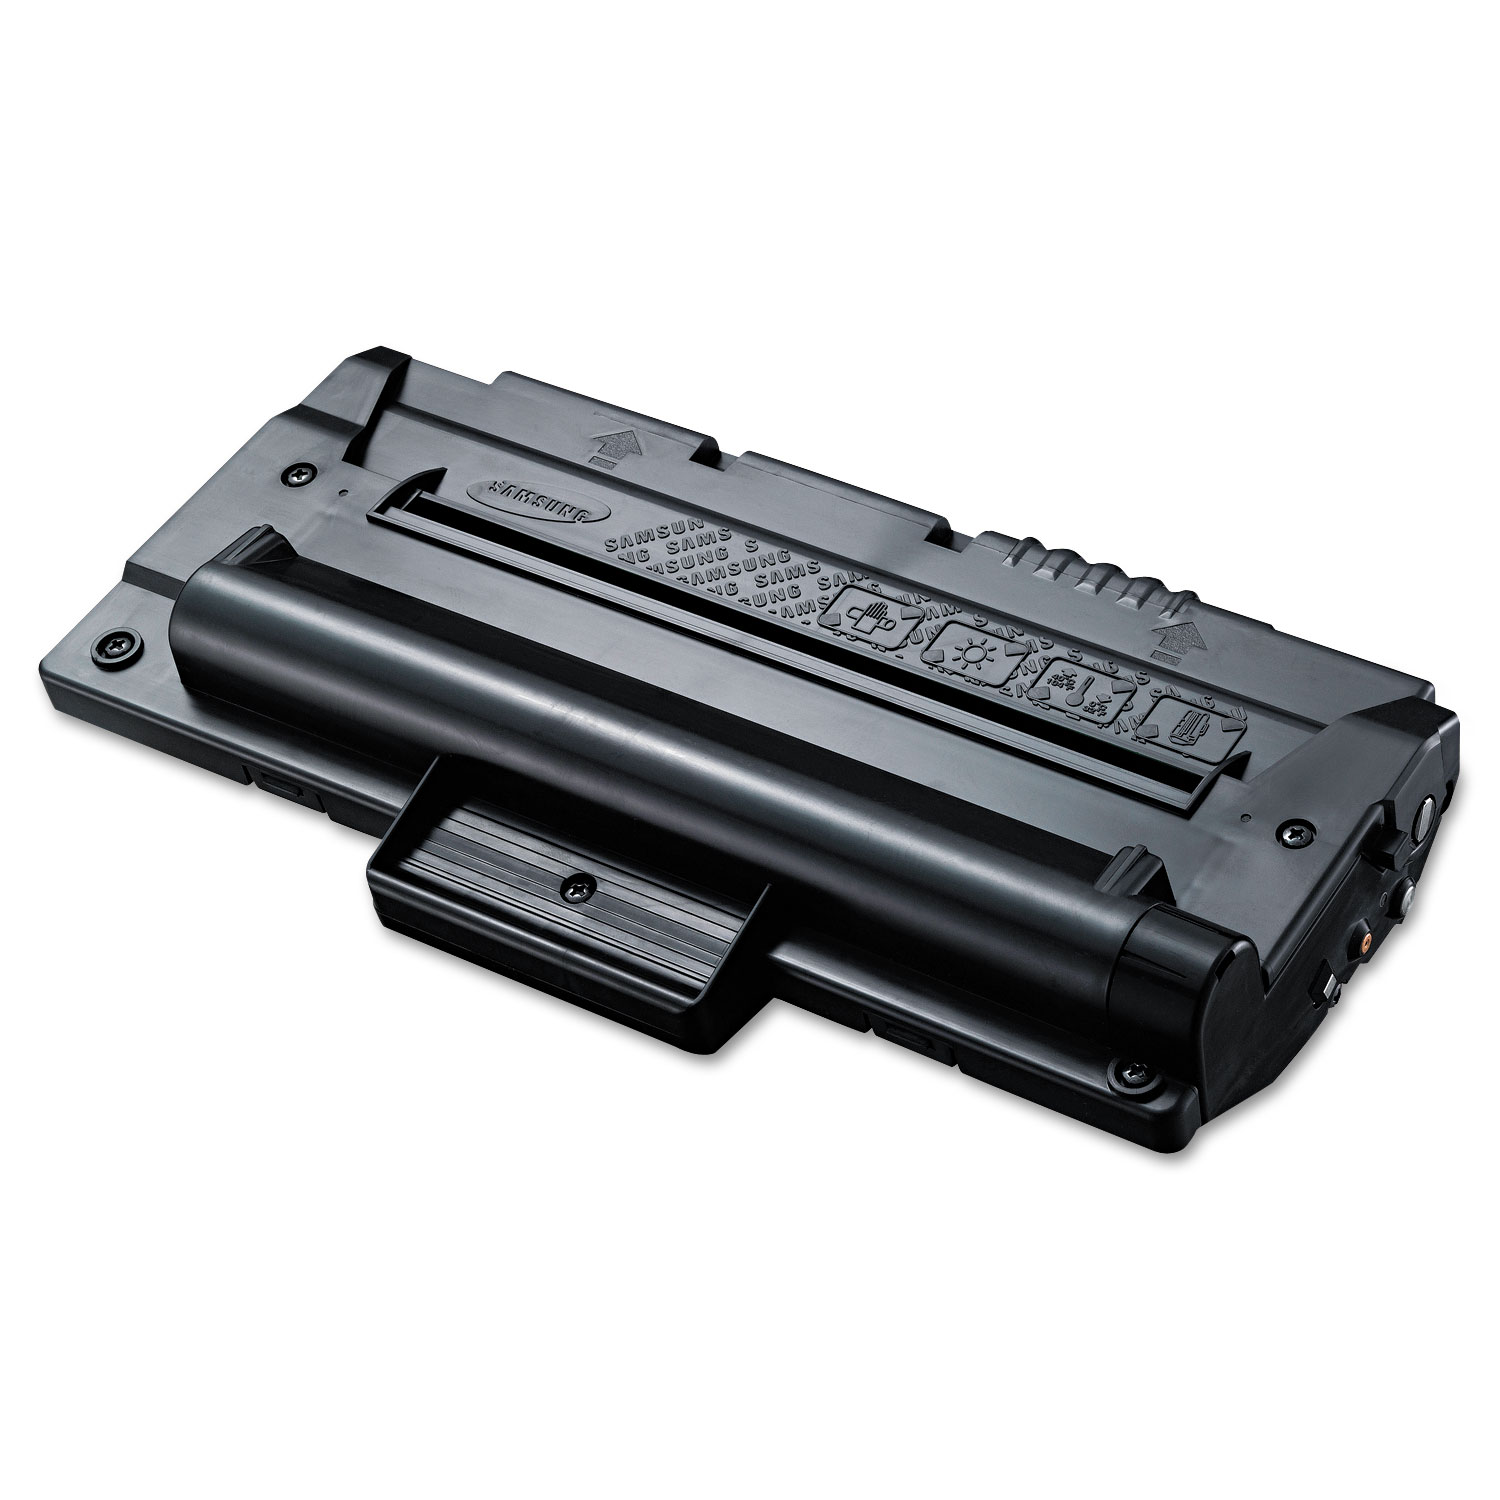 SCXD4200A Toner, 3000 Page-Yield, Black